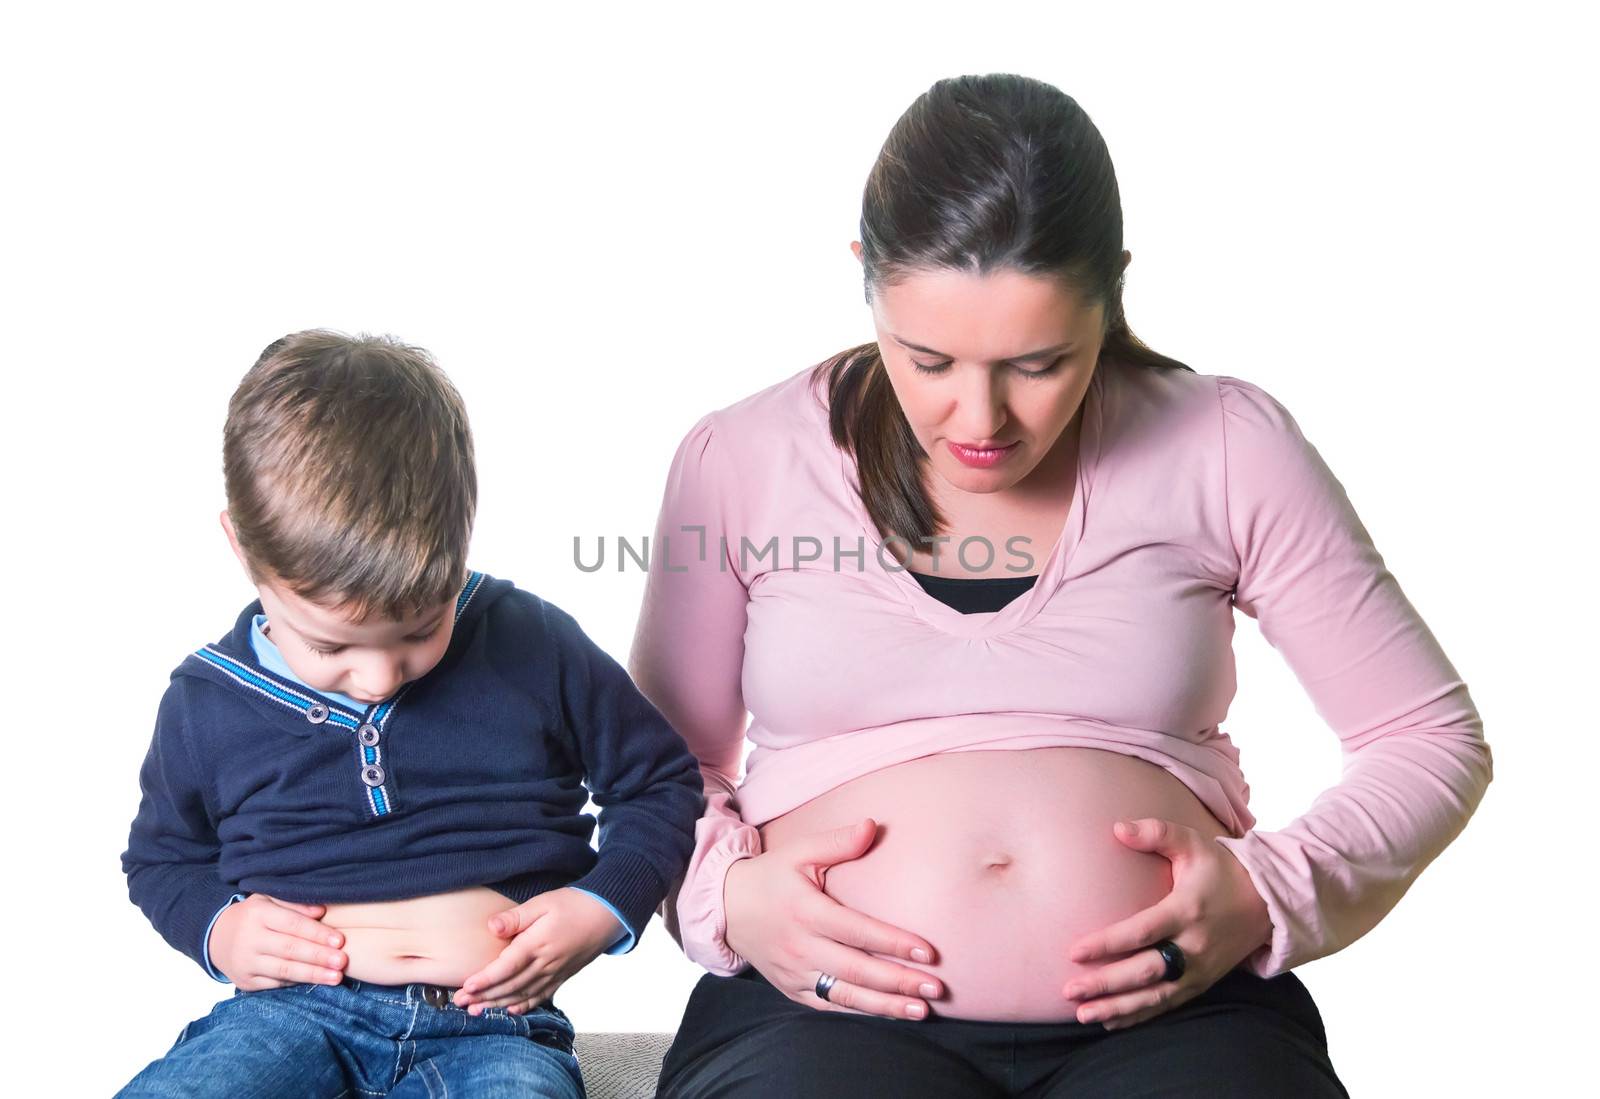 Pregnant mother and son laughing when comparing their bellies sitting on a sofa over white background